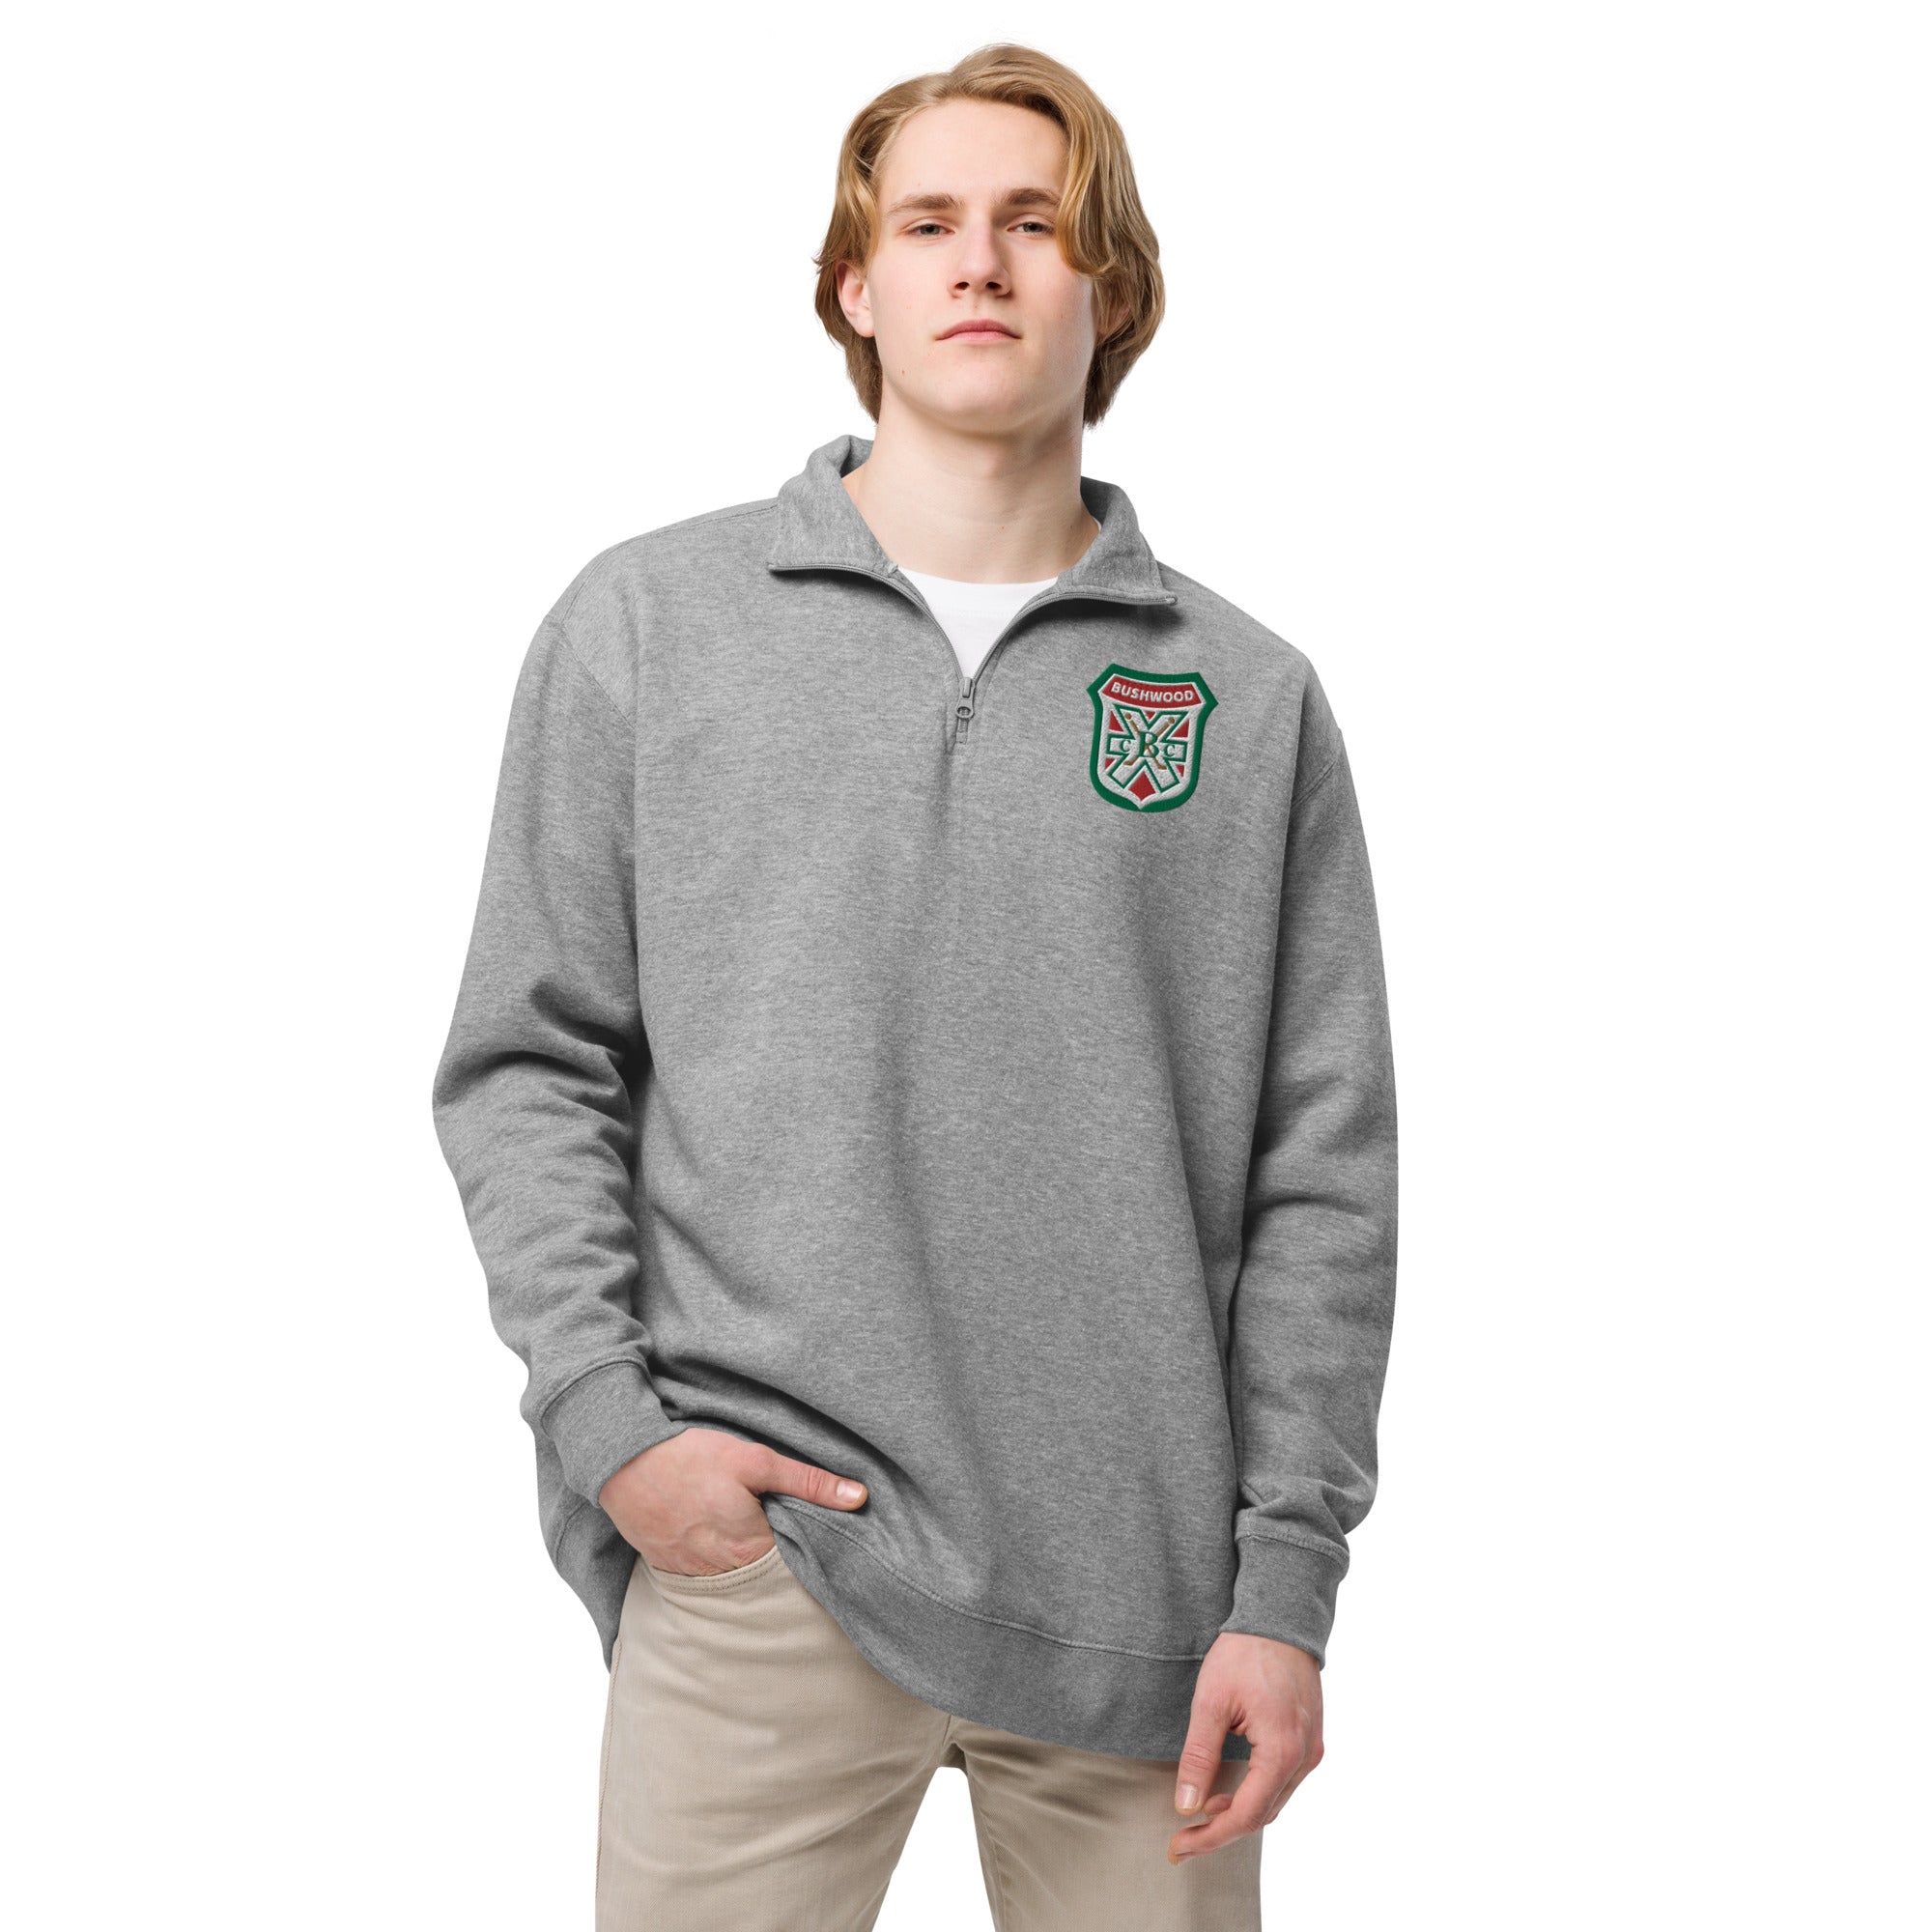 Bushwood Country Club Clubhouse Fleece Pullover